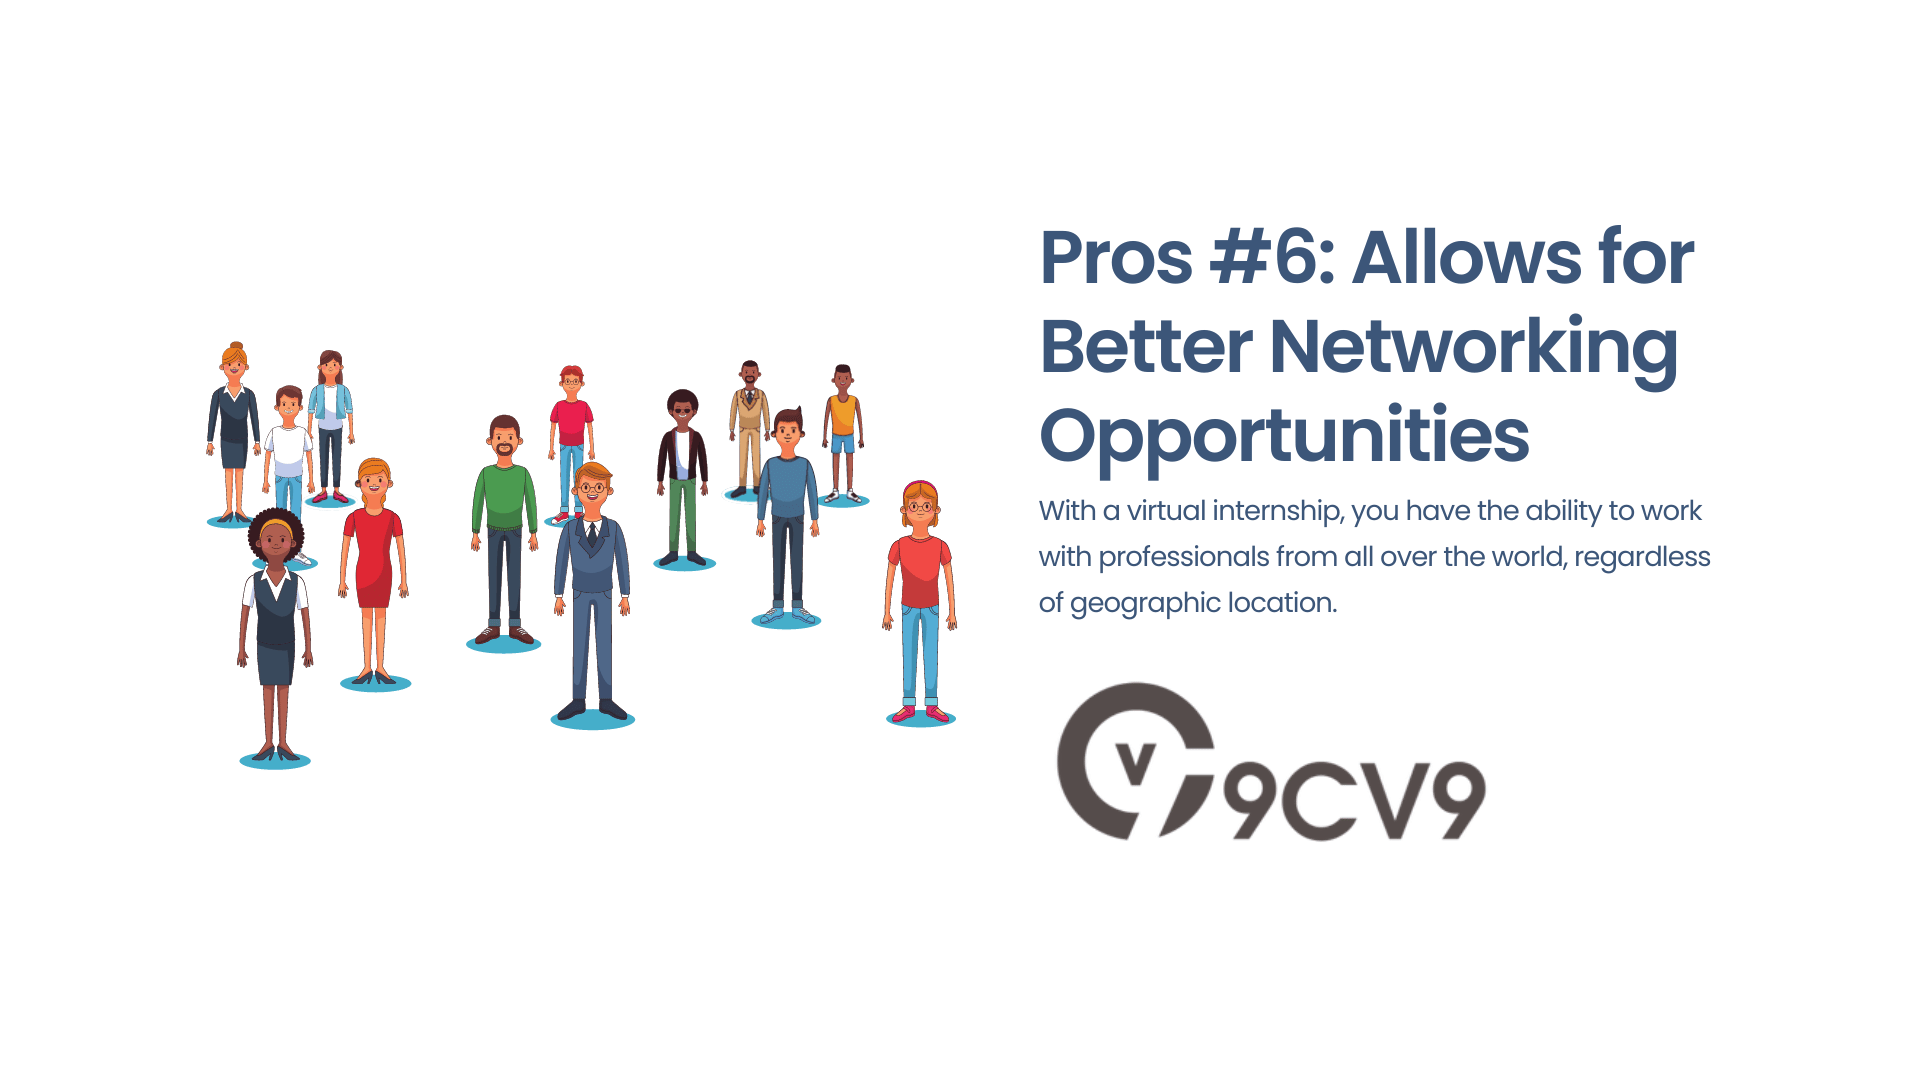 Pros #6: Allows for Better Networking Opportunities